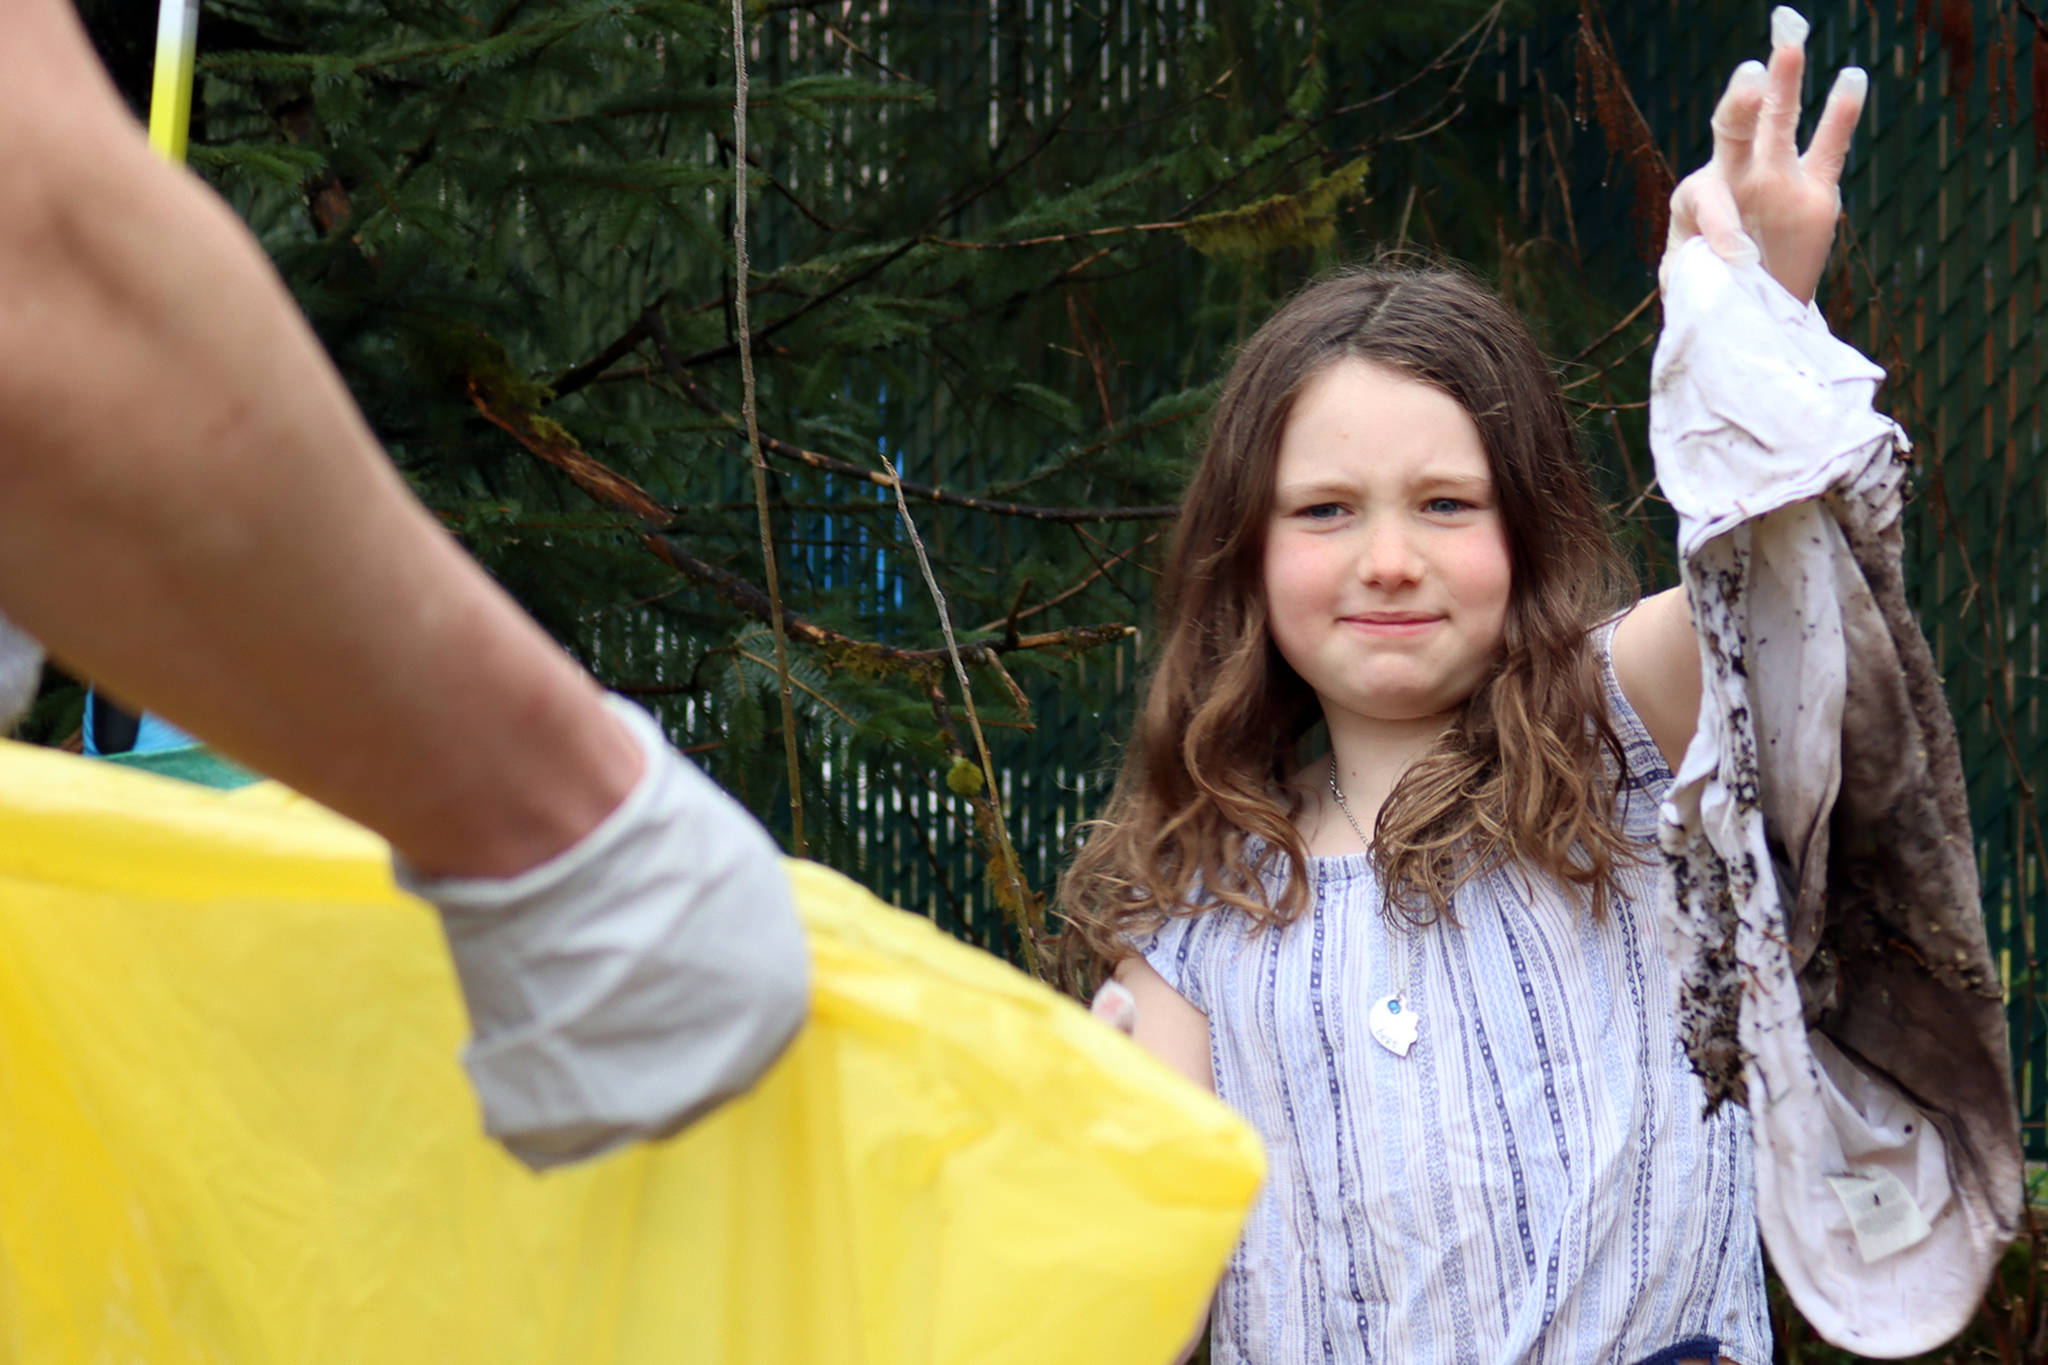 Nora Baldwin, 8, a member of Girl Scout Troop 4009, carries a dirty shirt found on the side of Mendenhall Loop Road in between gloved fingers toward a litter bag on Saturday, May 1, 2021. (Ben Hohenstatt / Juneau Empire)